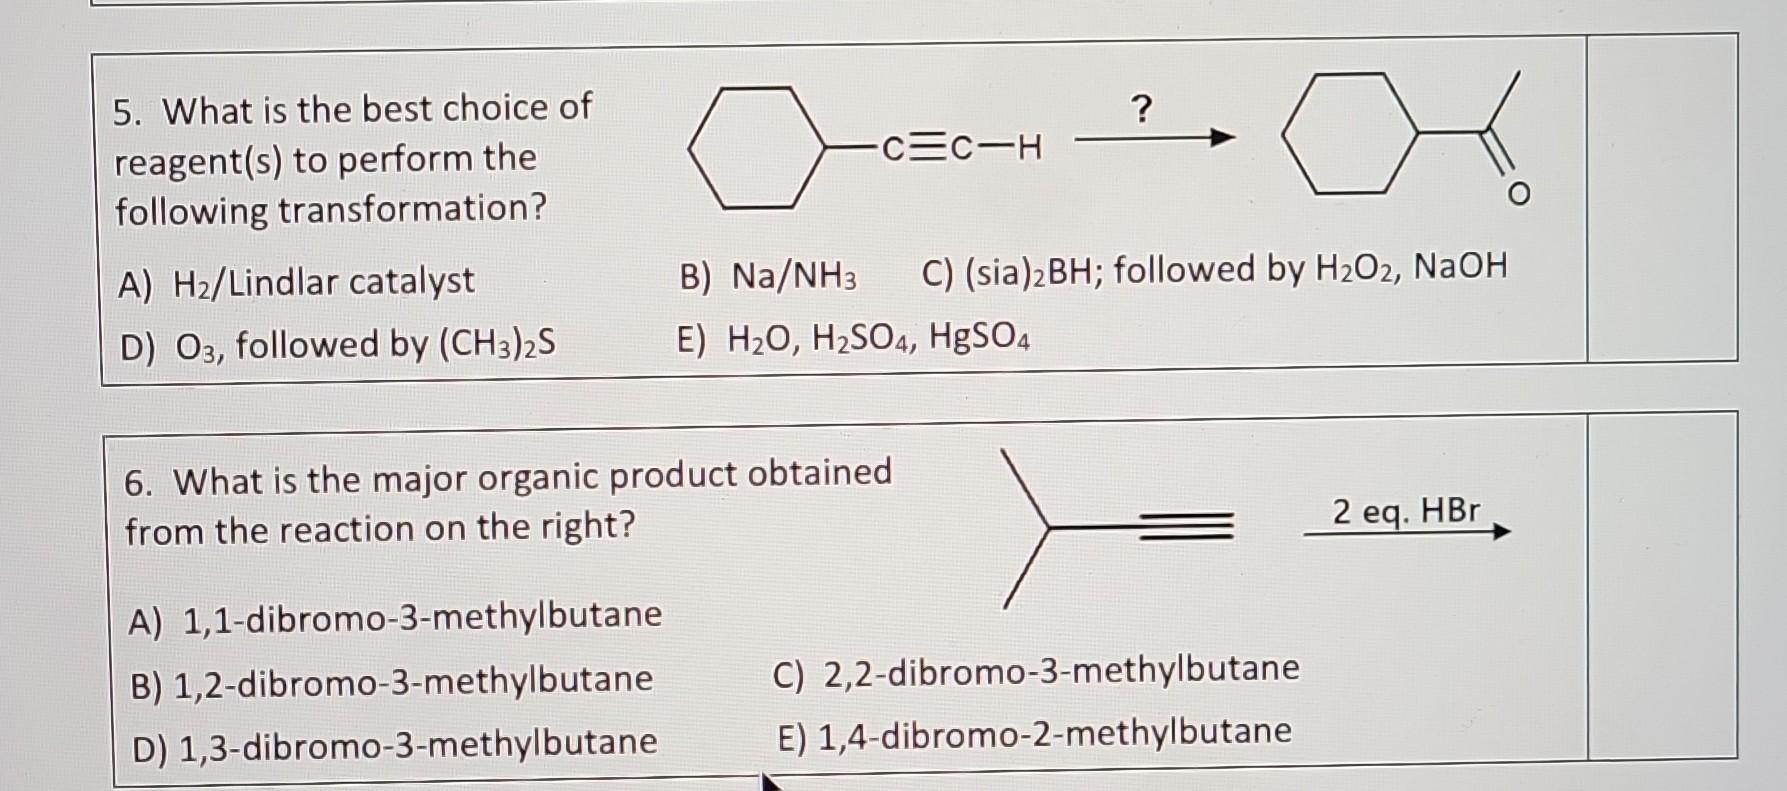 Lindlar's Catalyst as a Reagent in Organic Chemistry